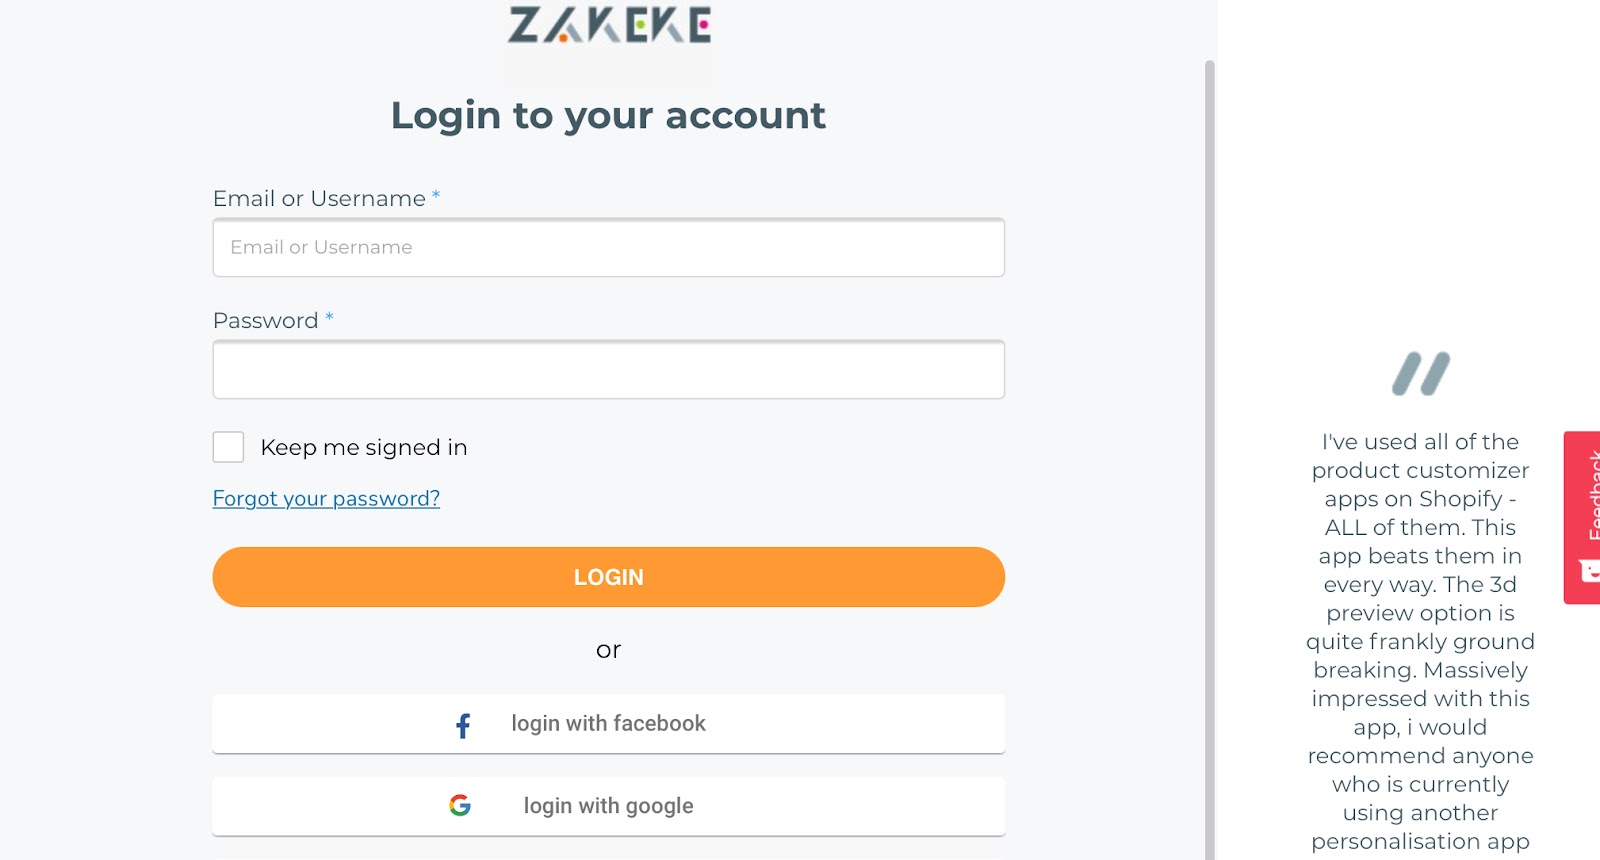 zakeke account sign in page